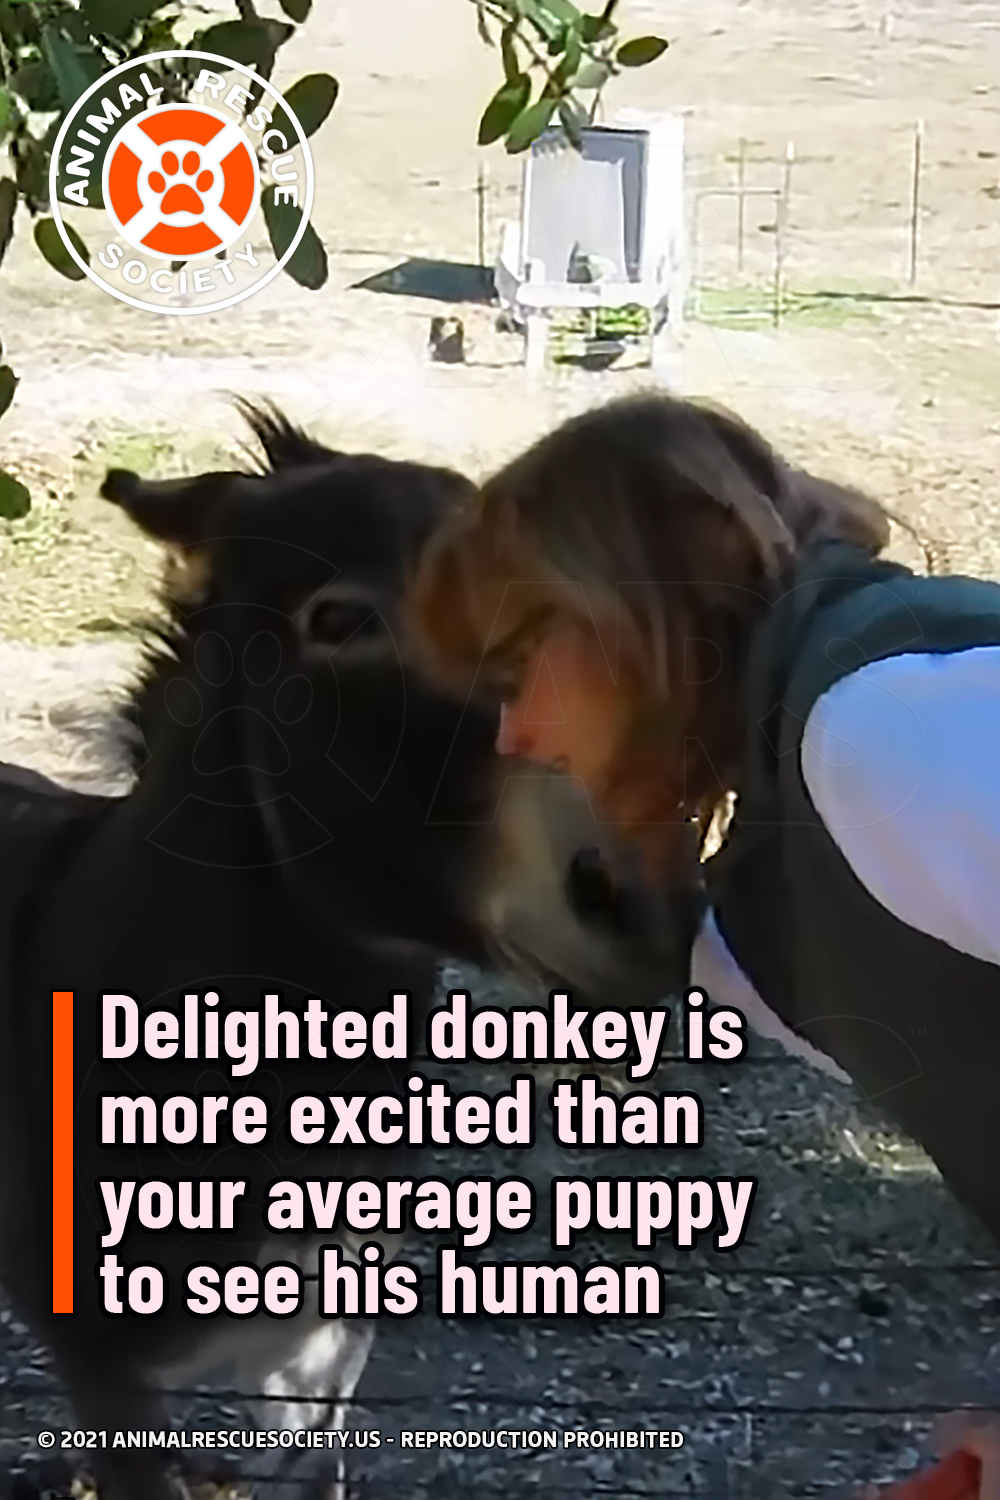 Delighted donkey is more excited than your average puppy to see his human